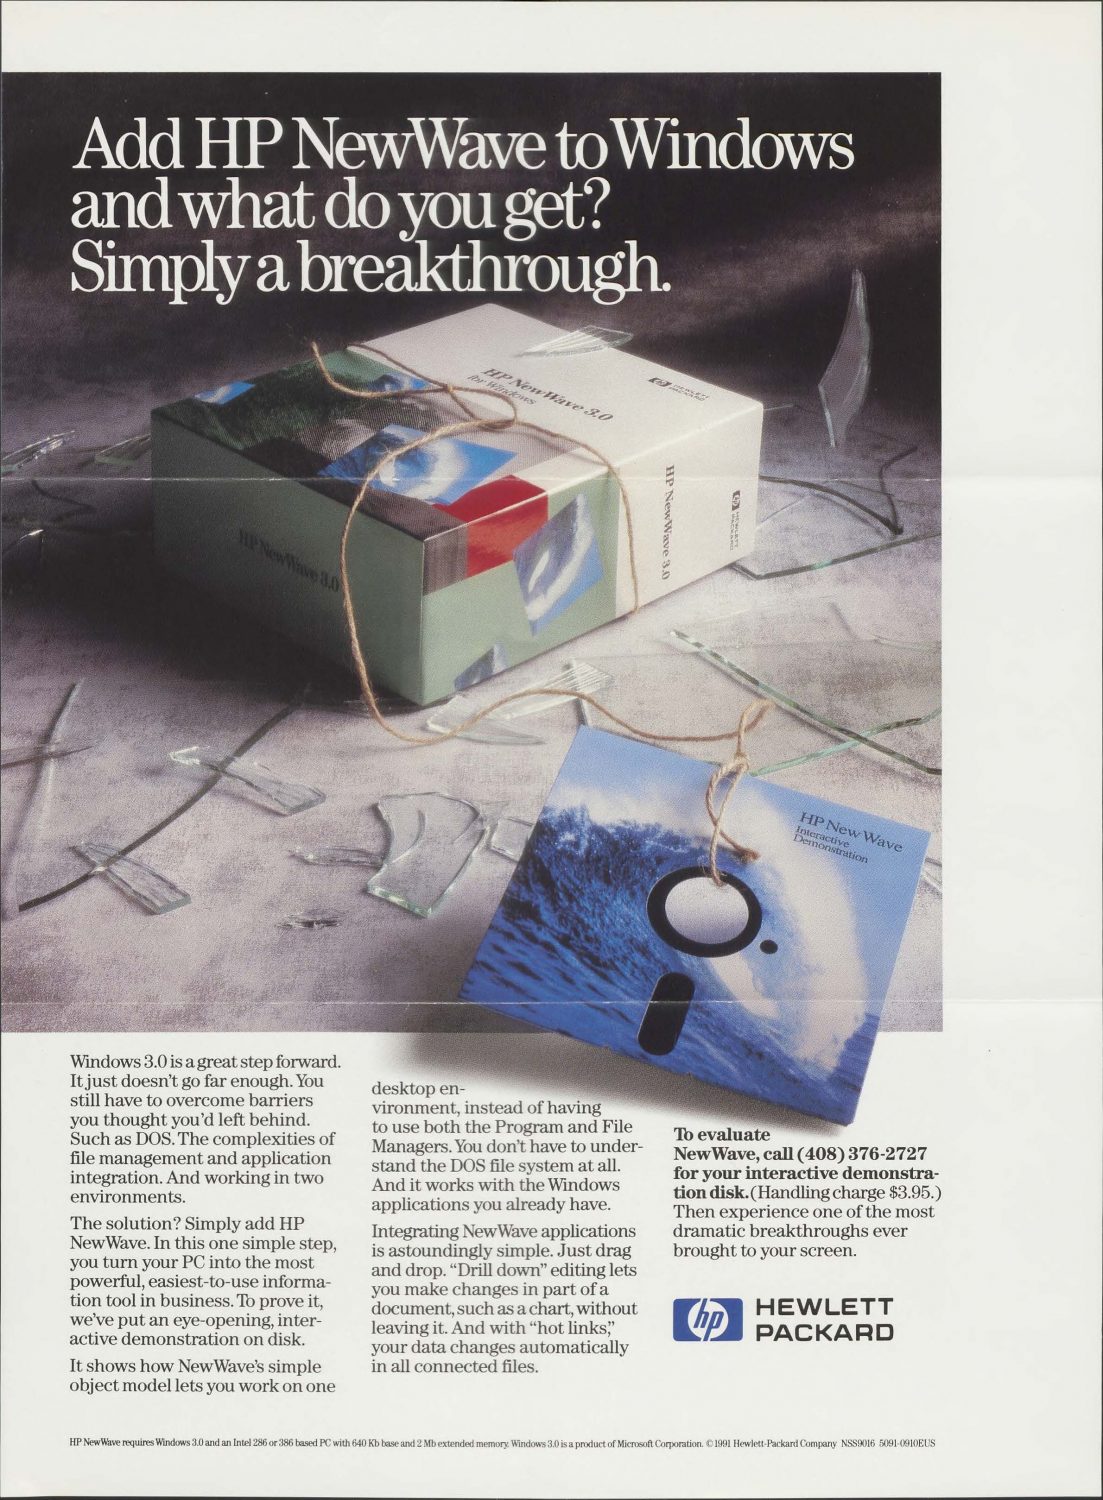 A print ad for the HP NewWave dated 1991.